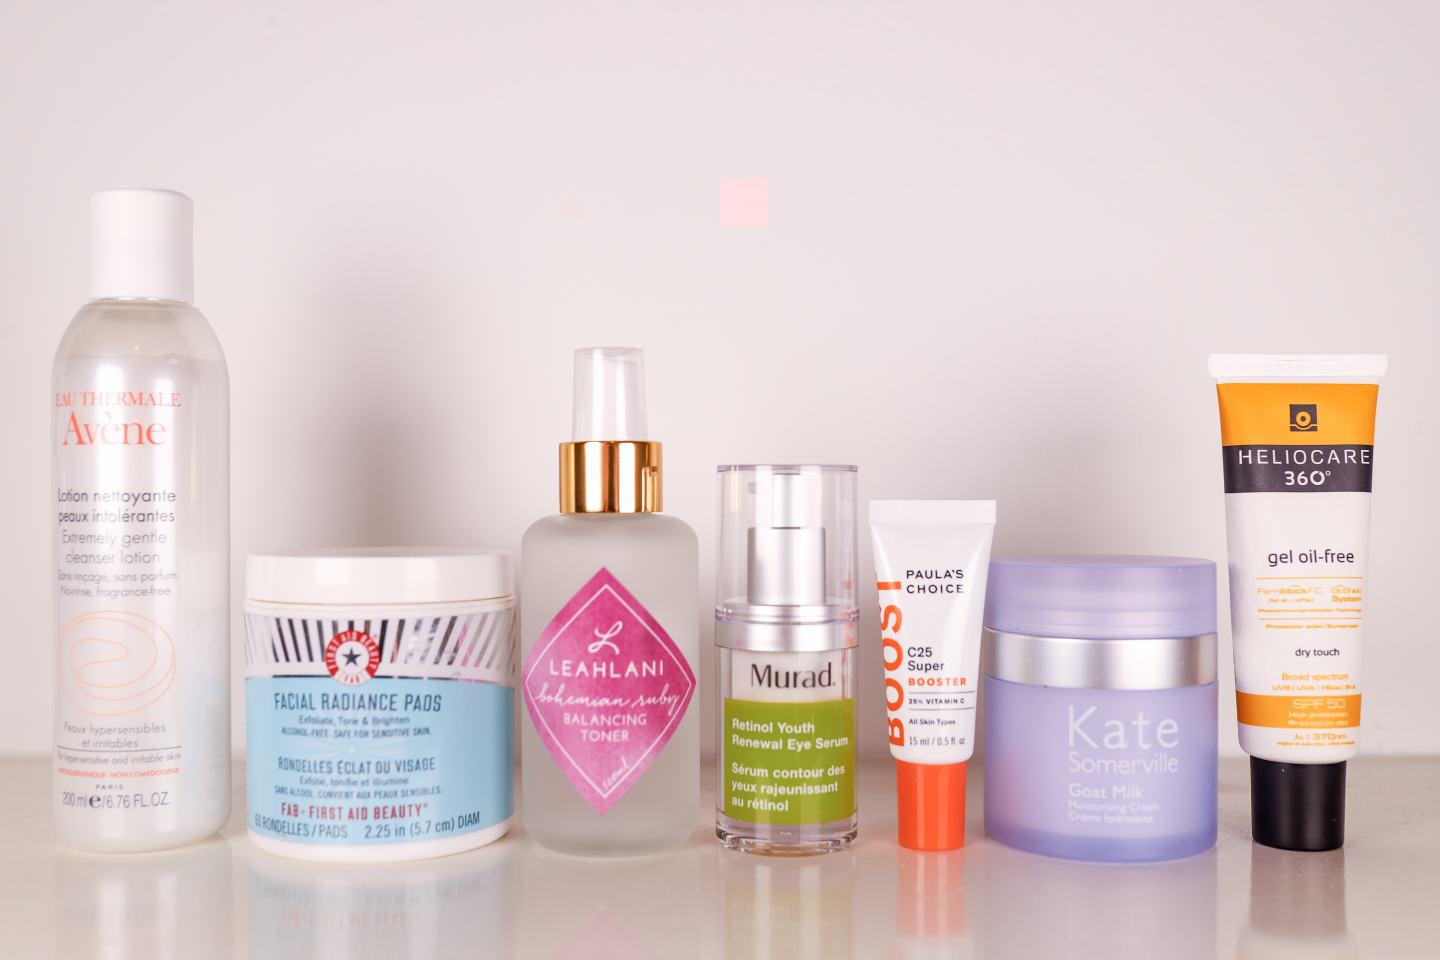 WINTER SKIN ROUTINES - YOUR A.M. LINE-UP